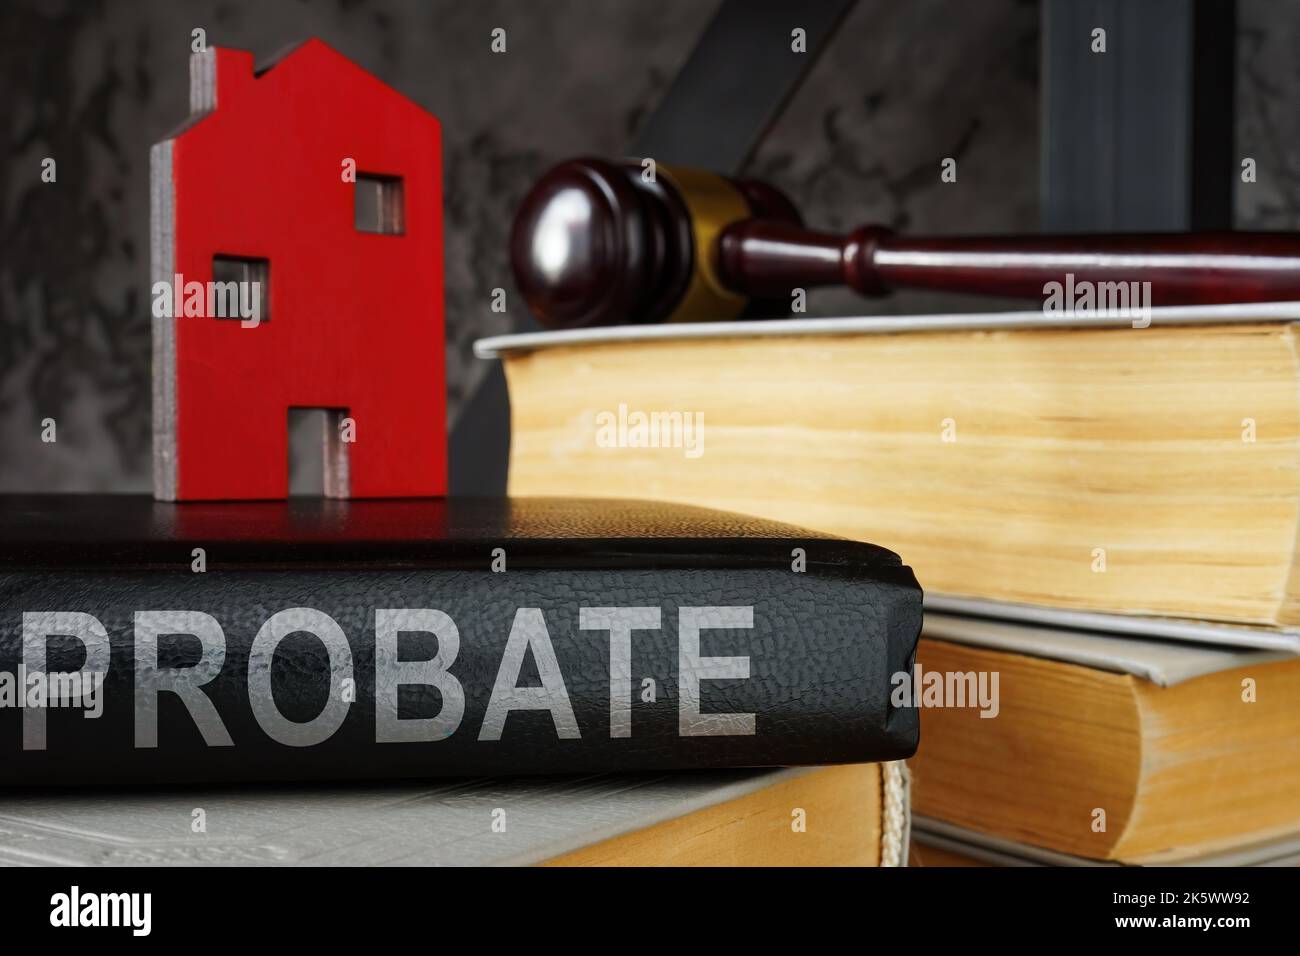 Probate law book and model of house on it. Stock Photo